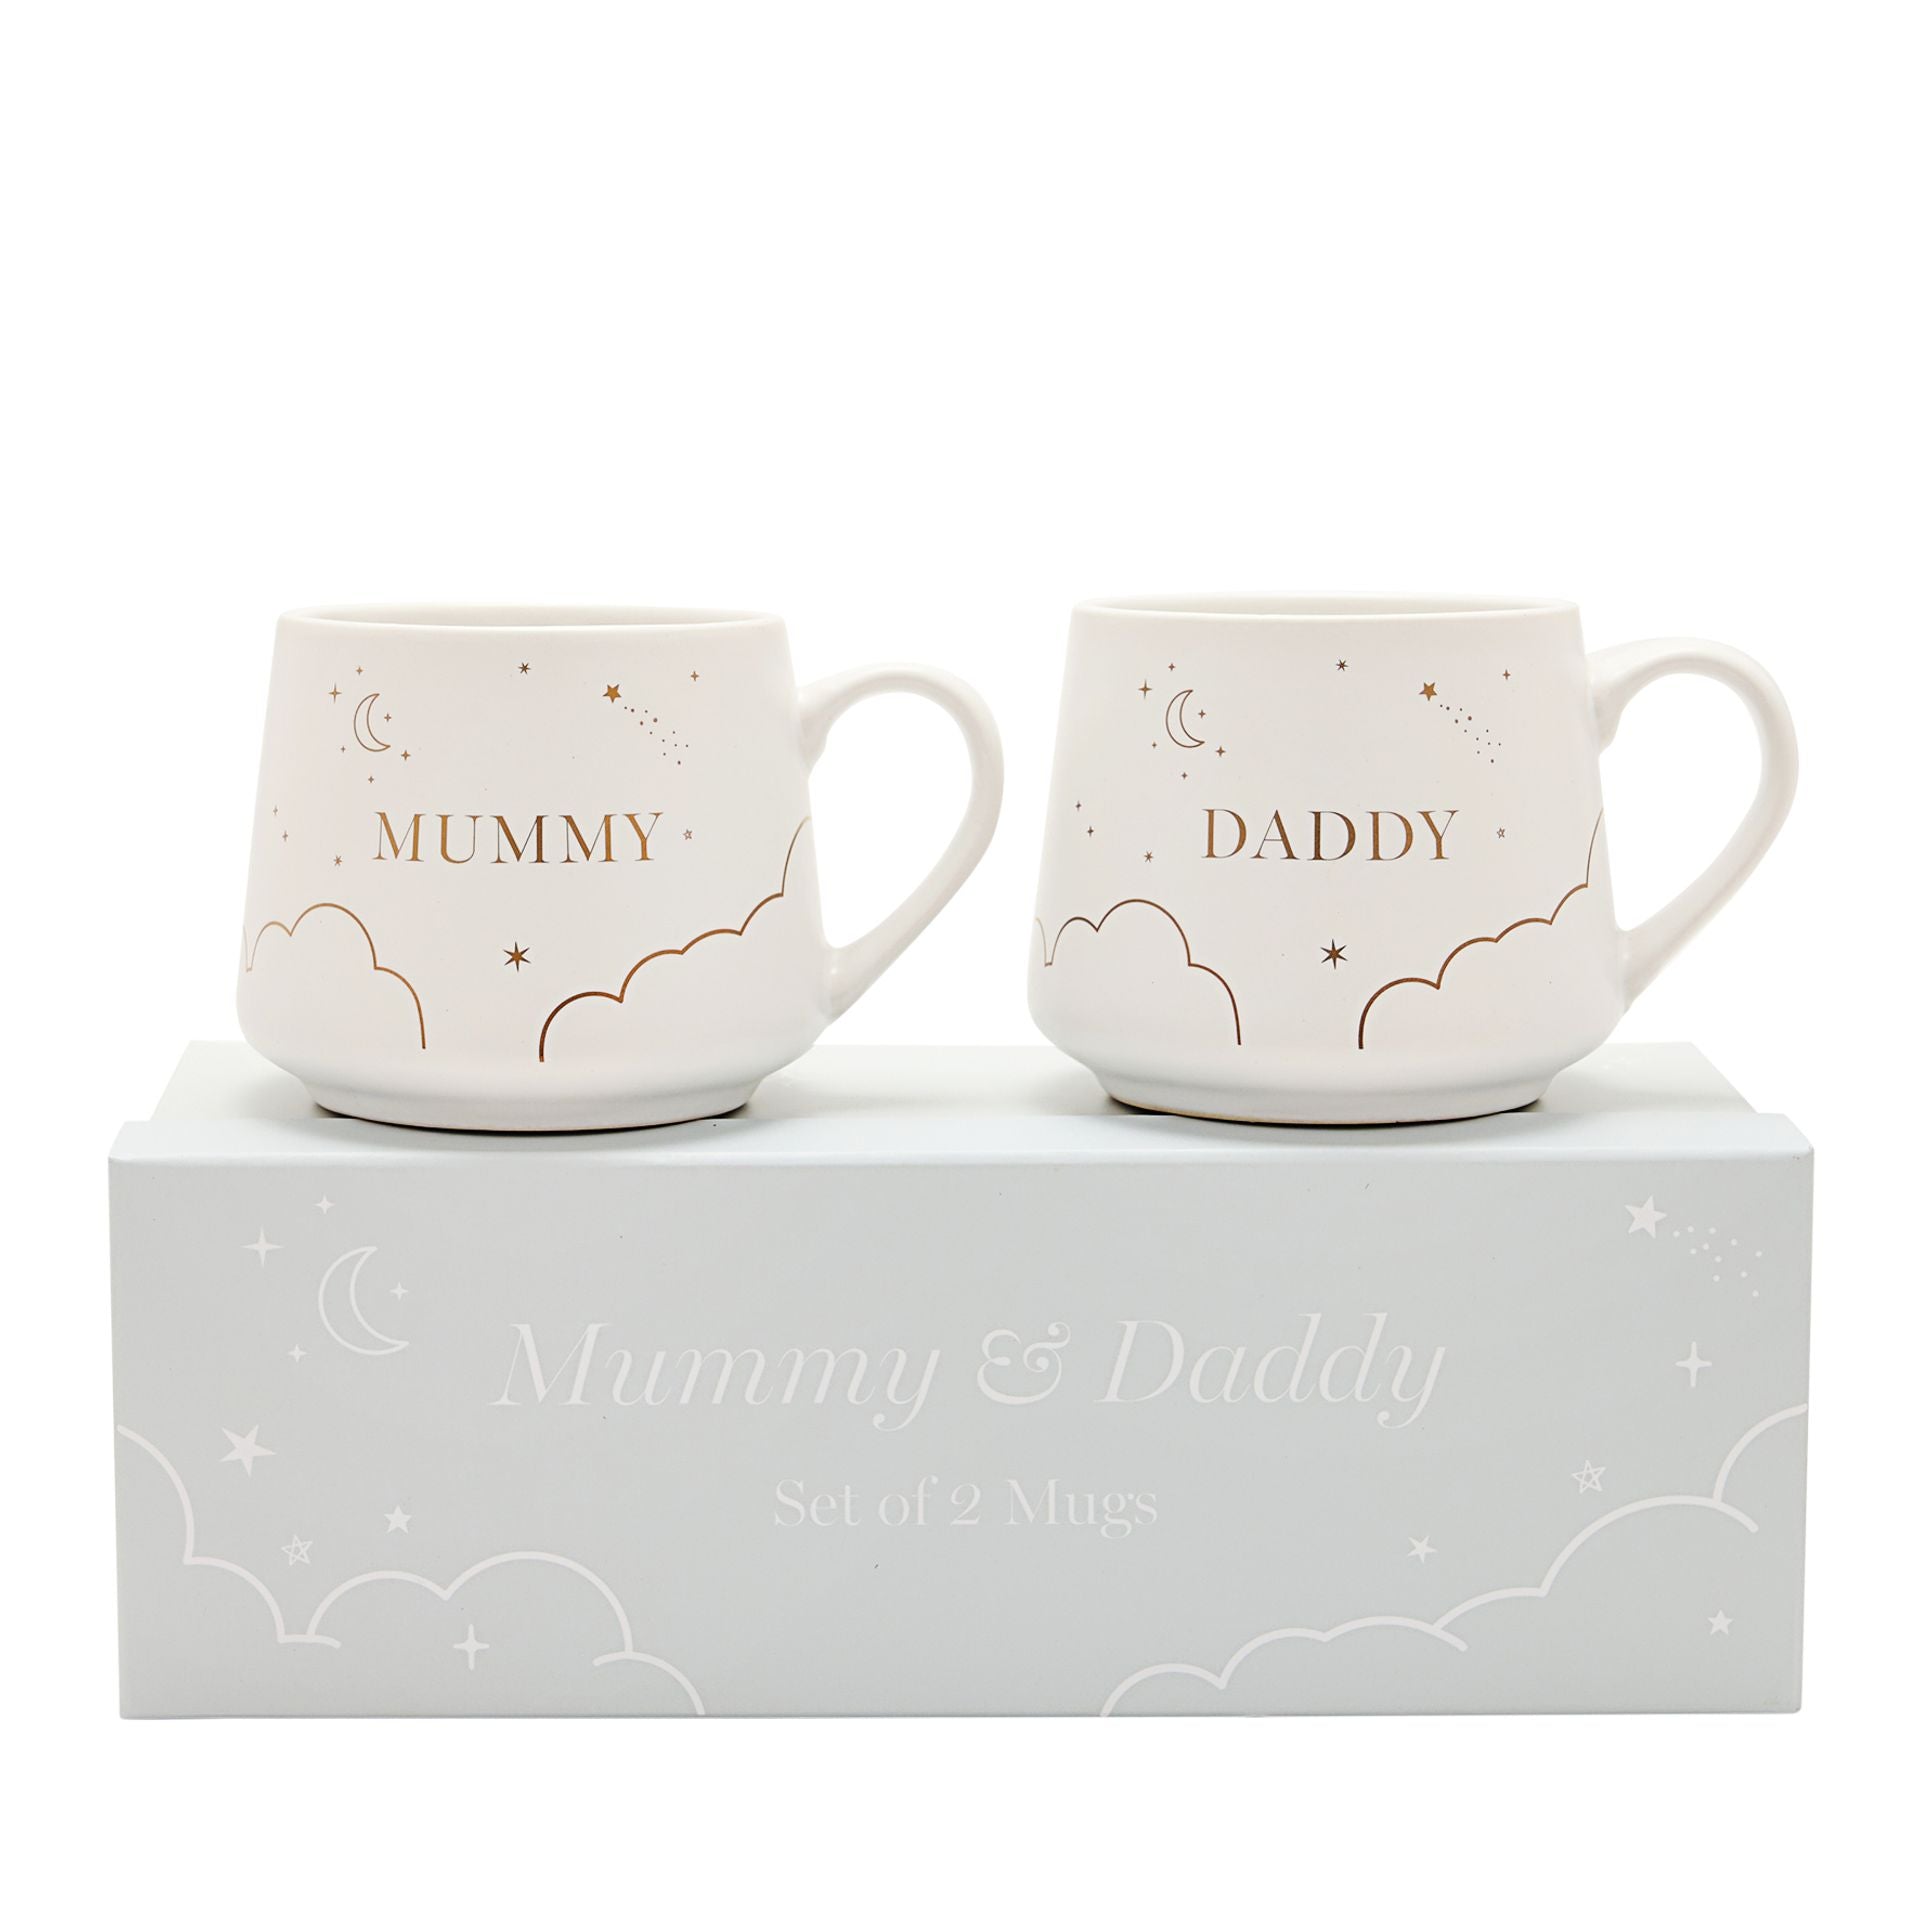 Set of two mugs with Mummy and Daddy written on them